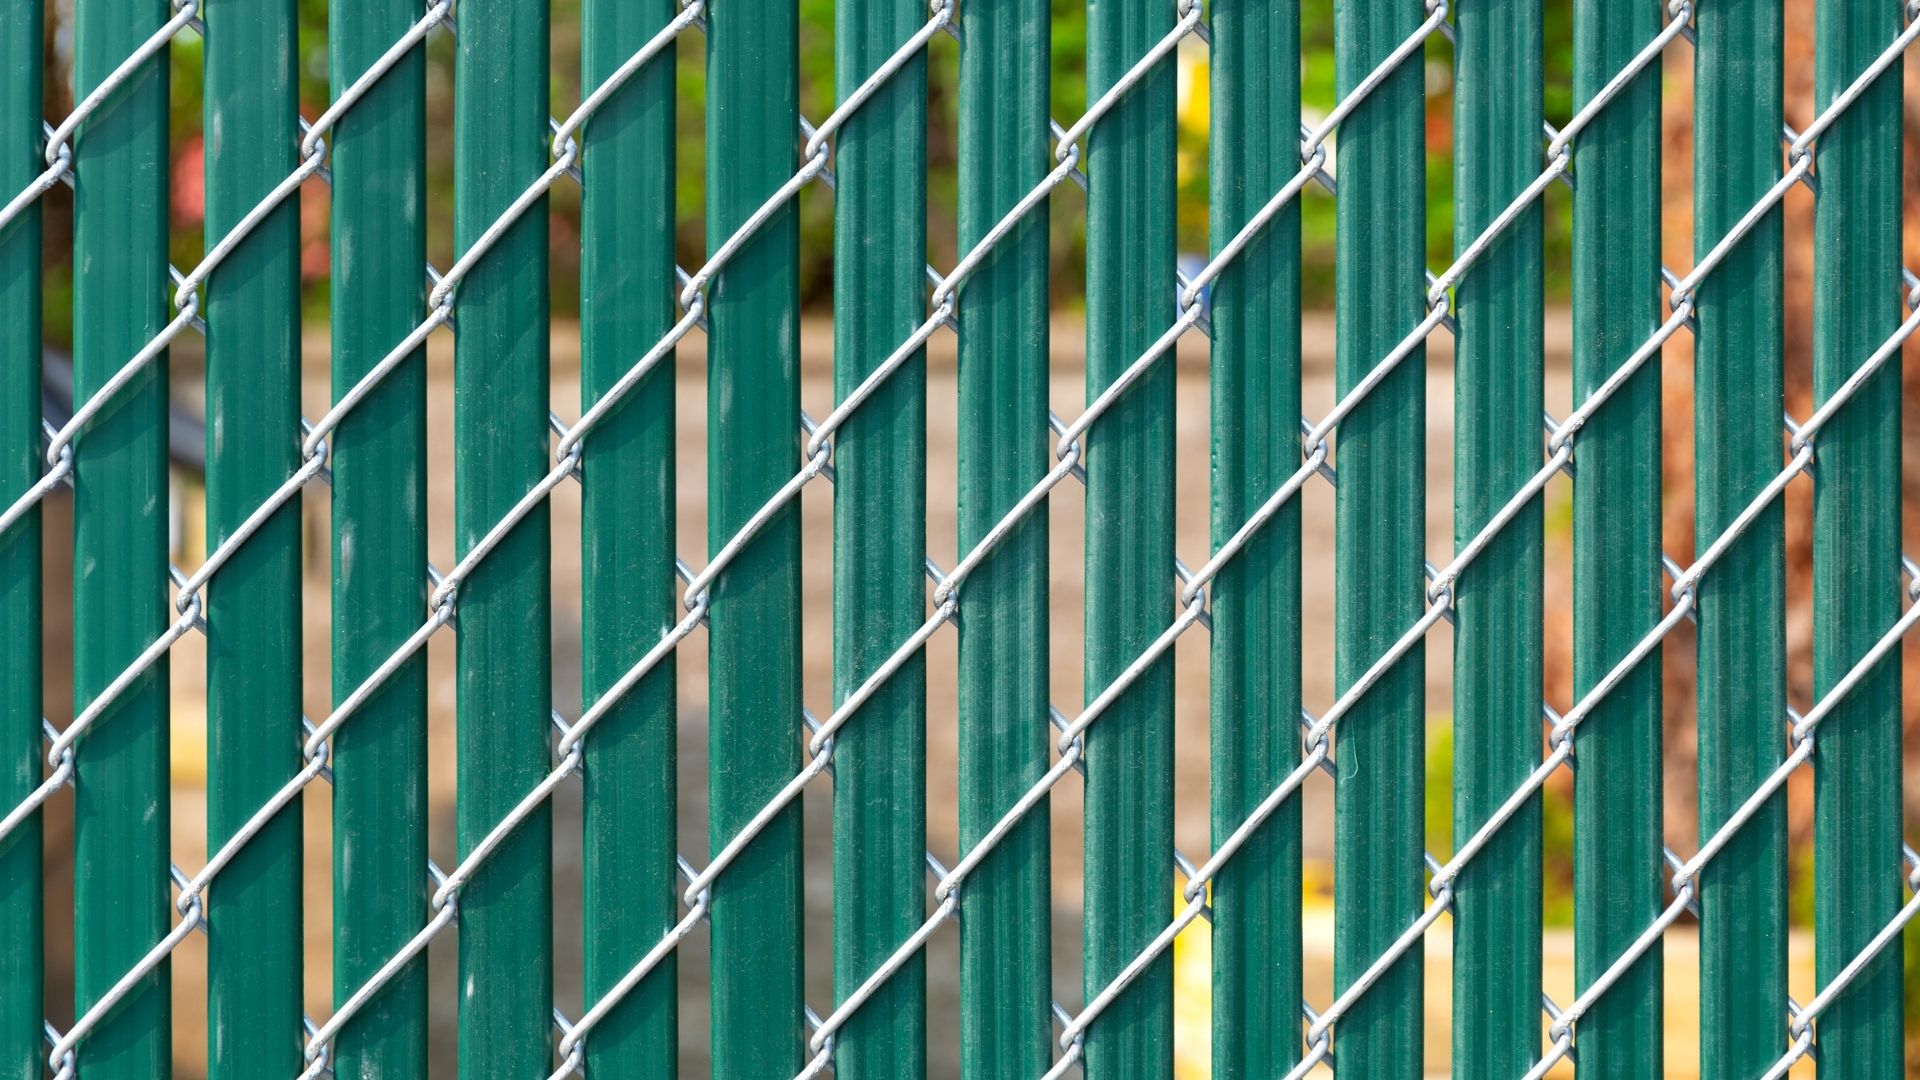 How To Add Privacy to a Chain Link Fence